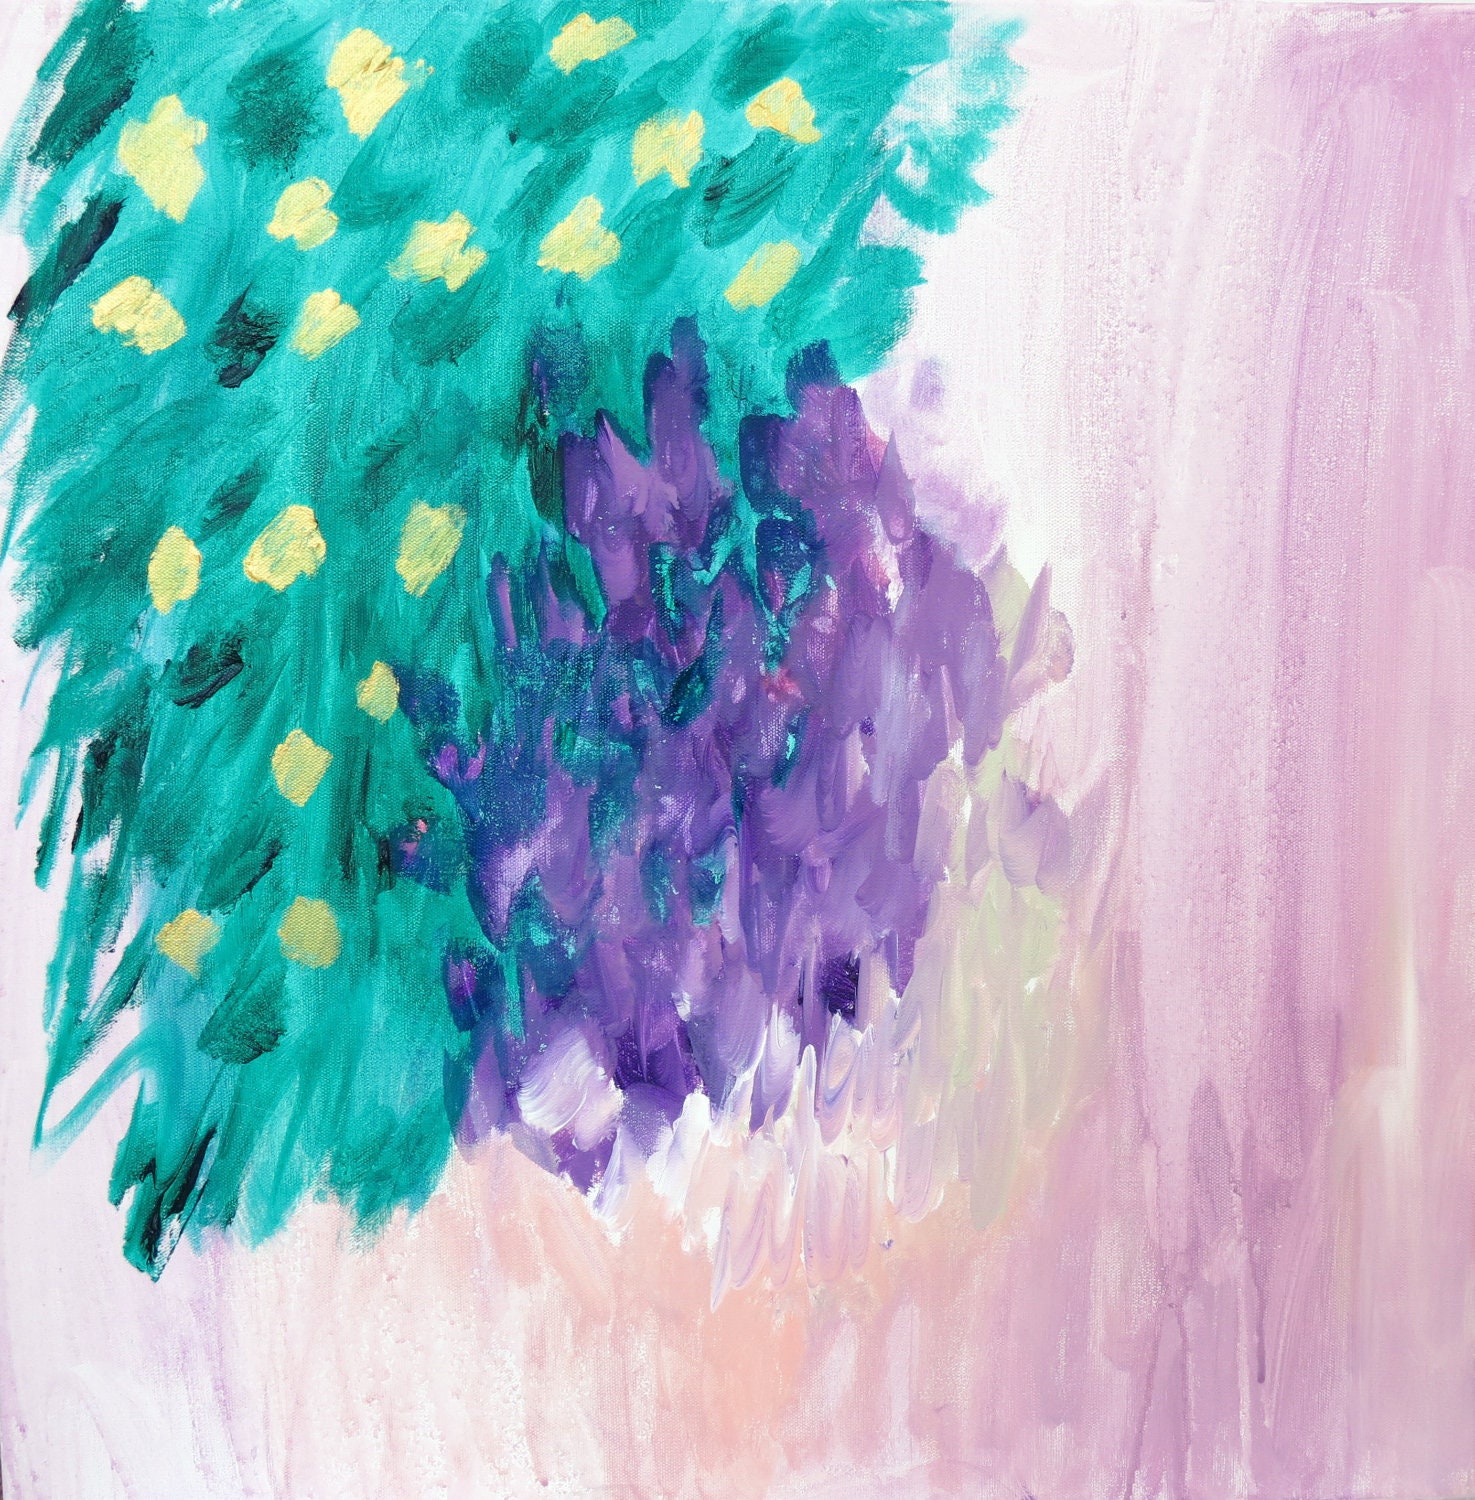 Art Original Abstract Painting "Wisteria" with Purple, Pink, Emerald Green and Gold 24x24 Painting on Canvas